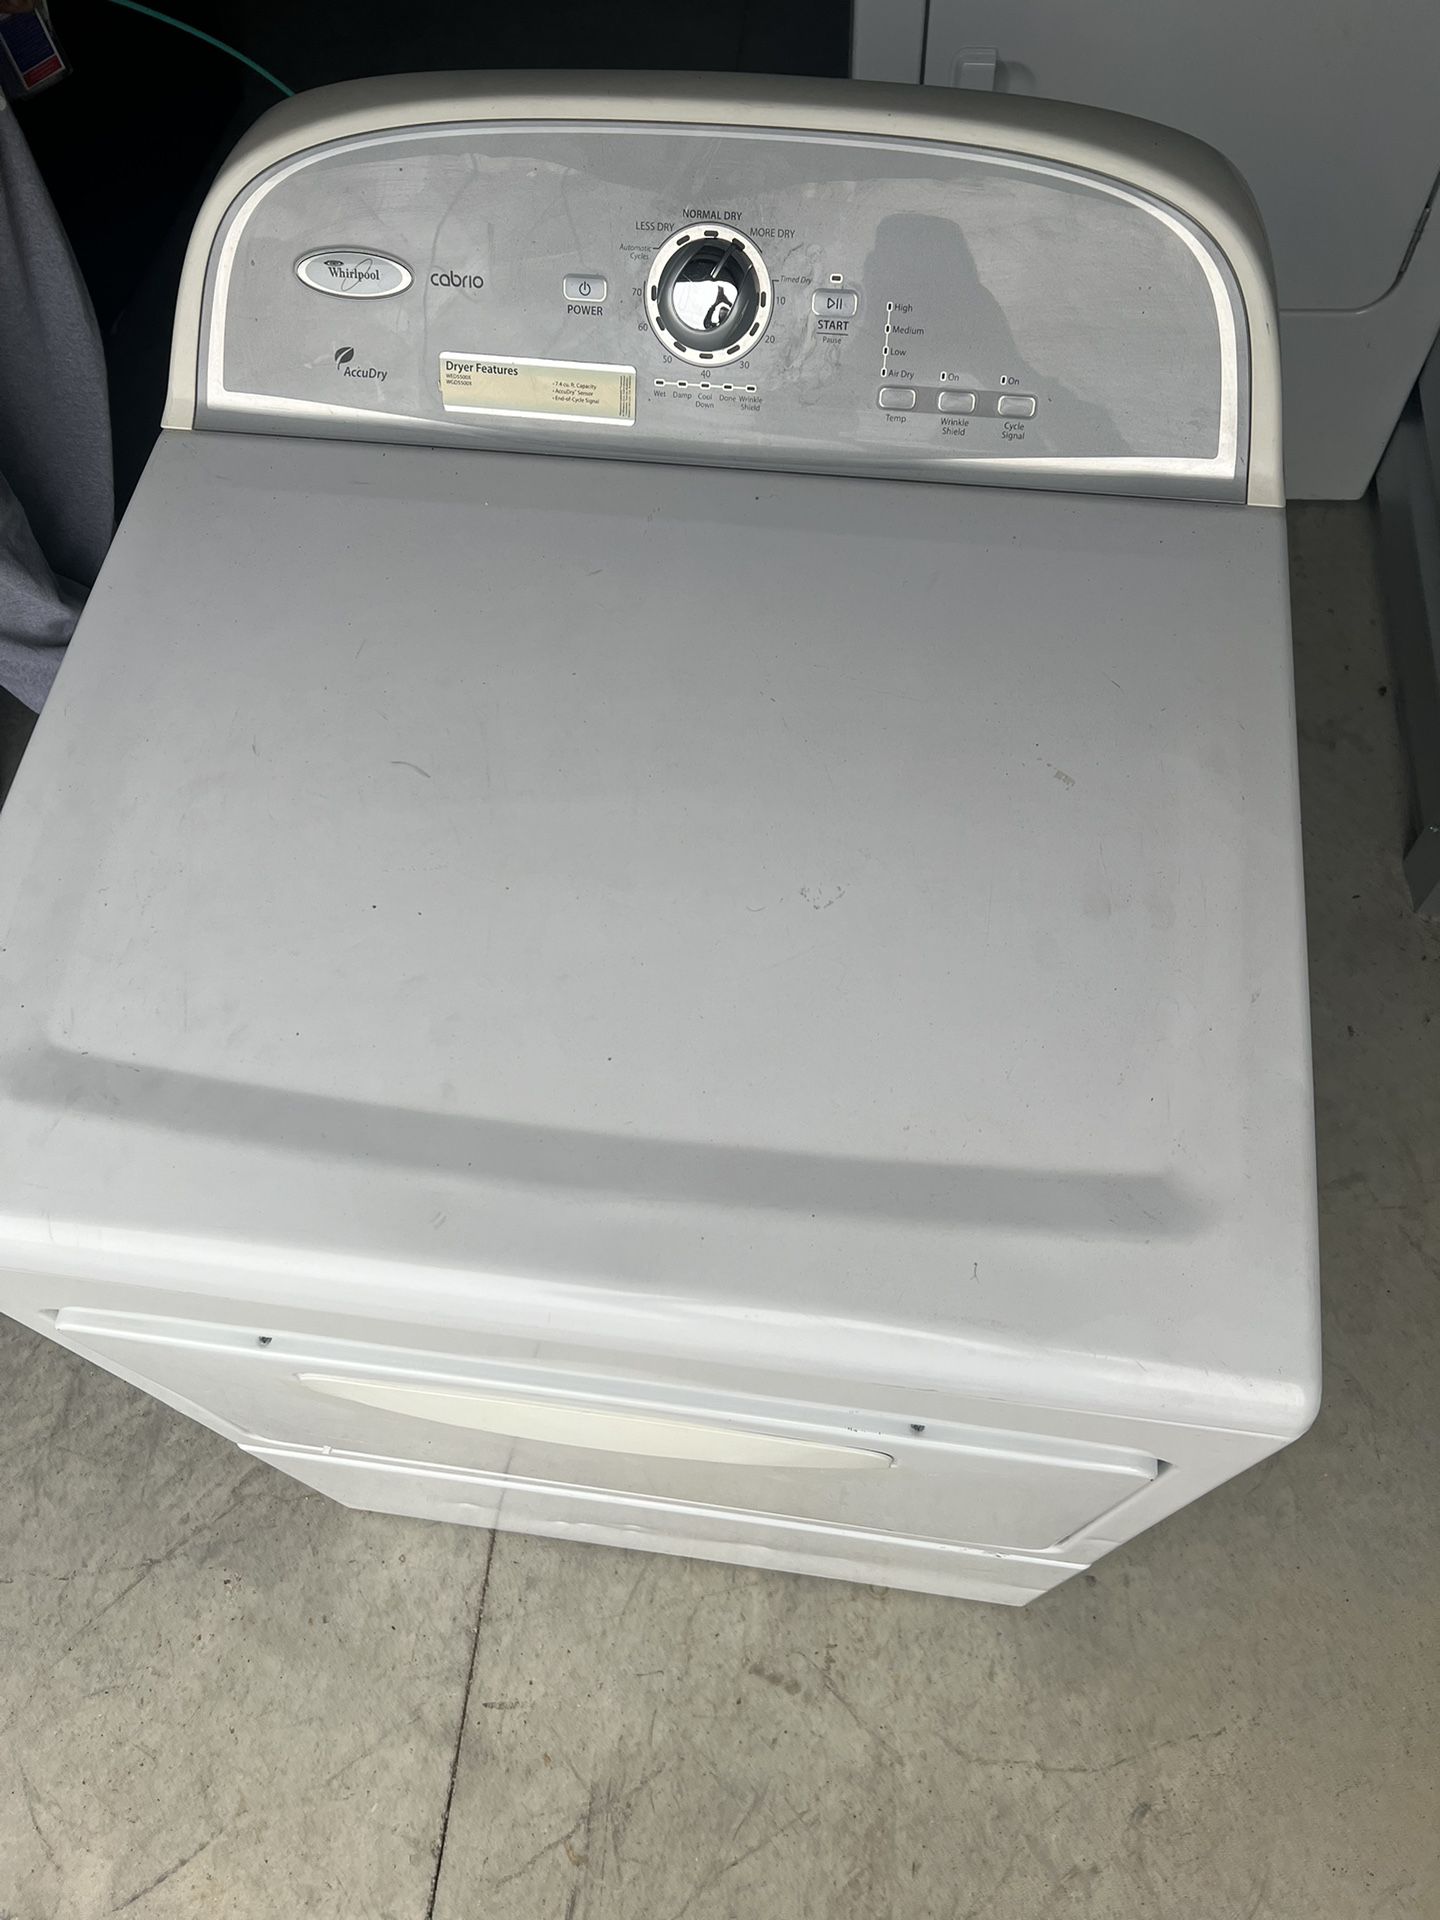 Whirlpool Dryer 7.4cu Front load 